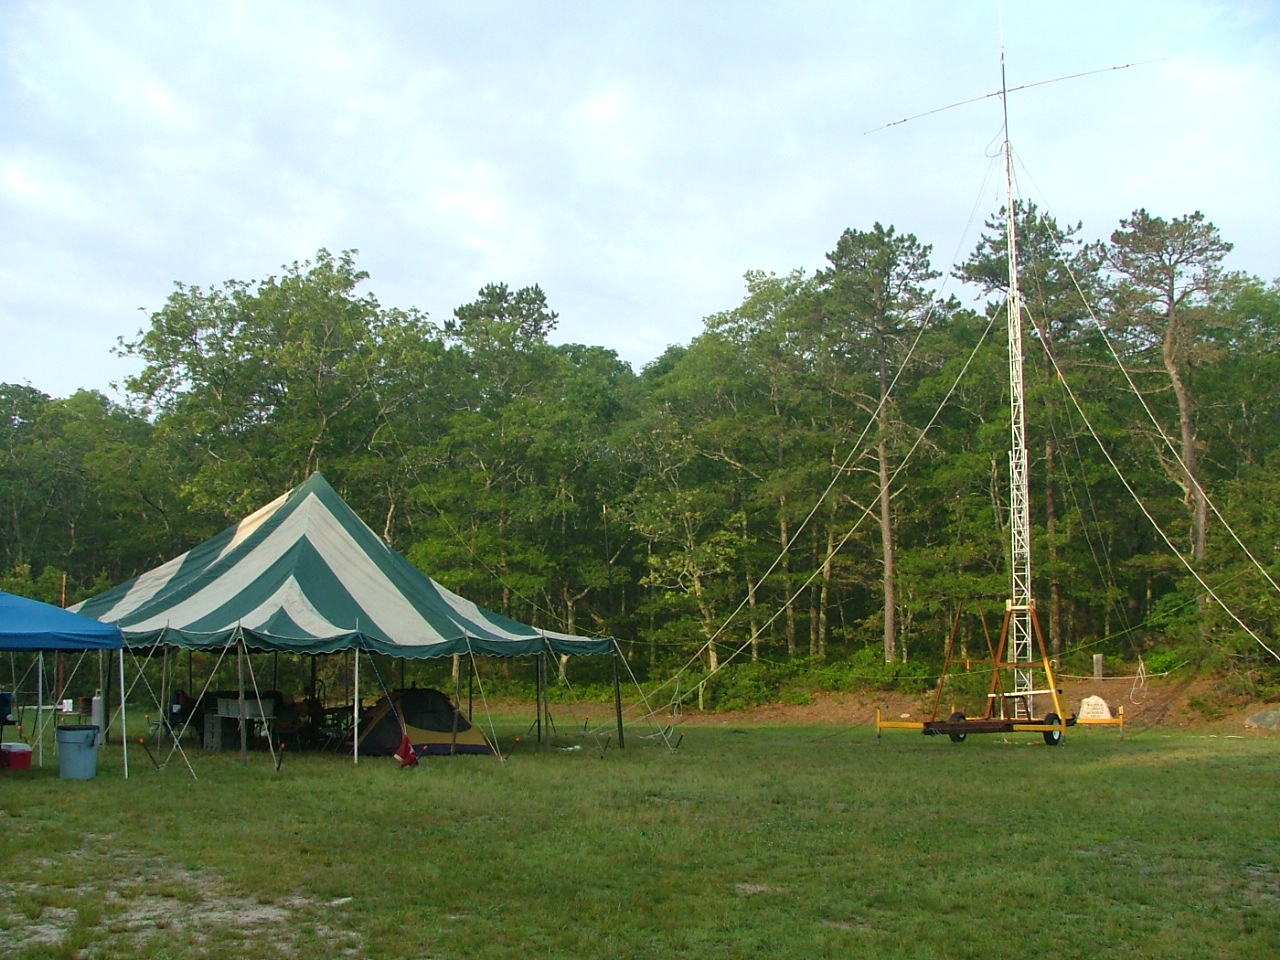 30&#039;x30&#039; tent is our operating center